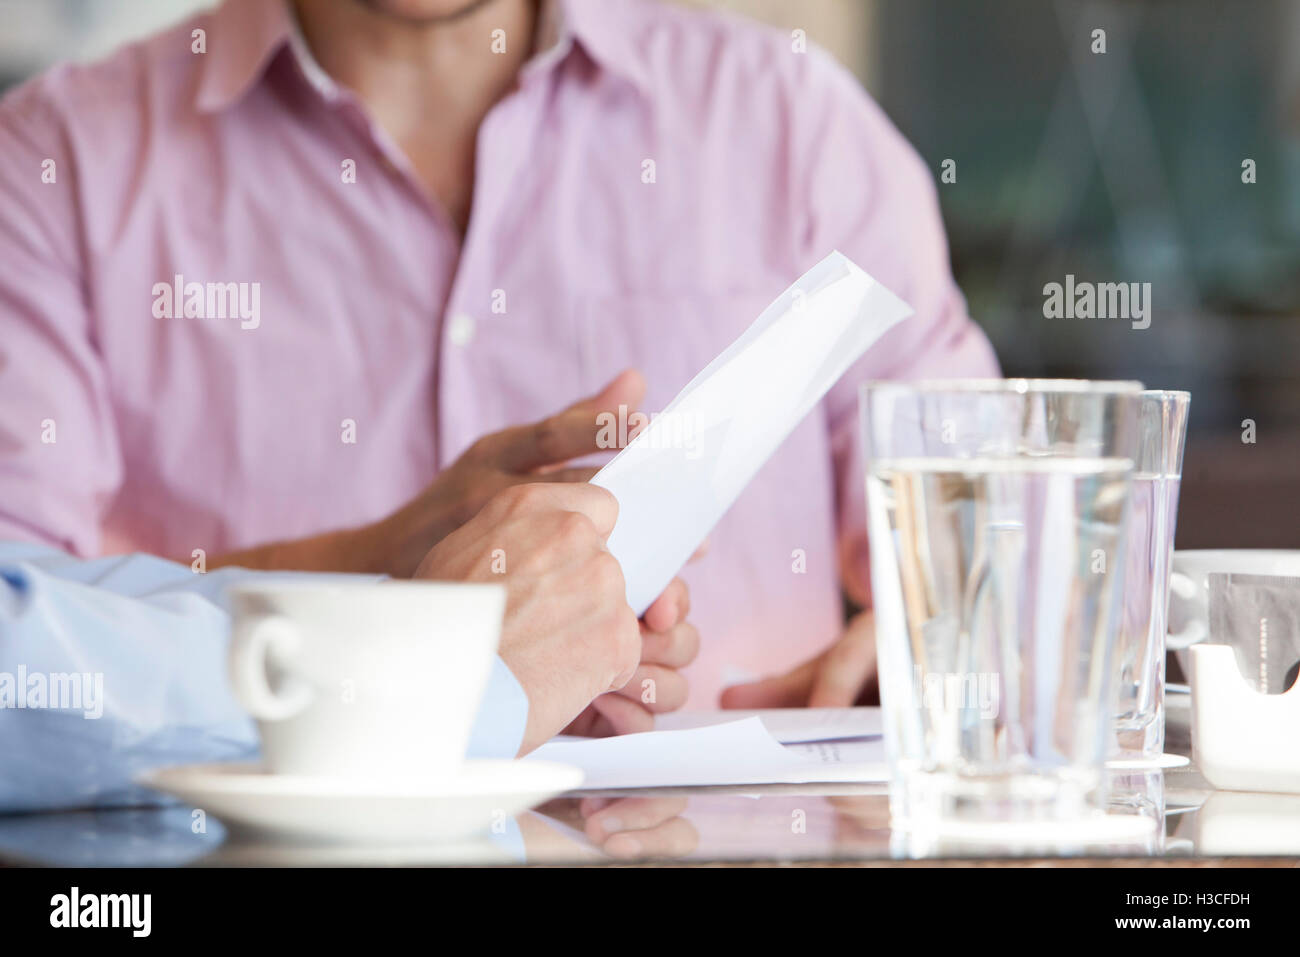 Businessmen discussing business document Stock Photo